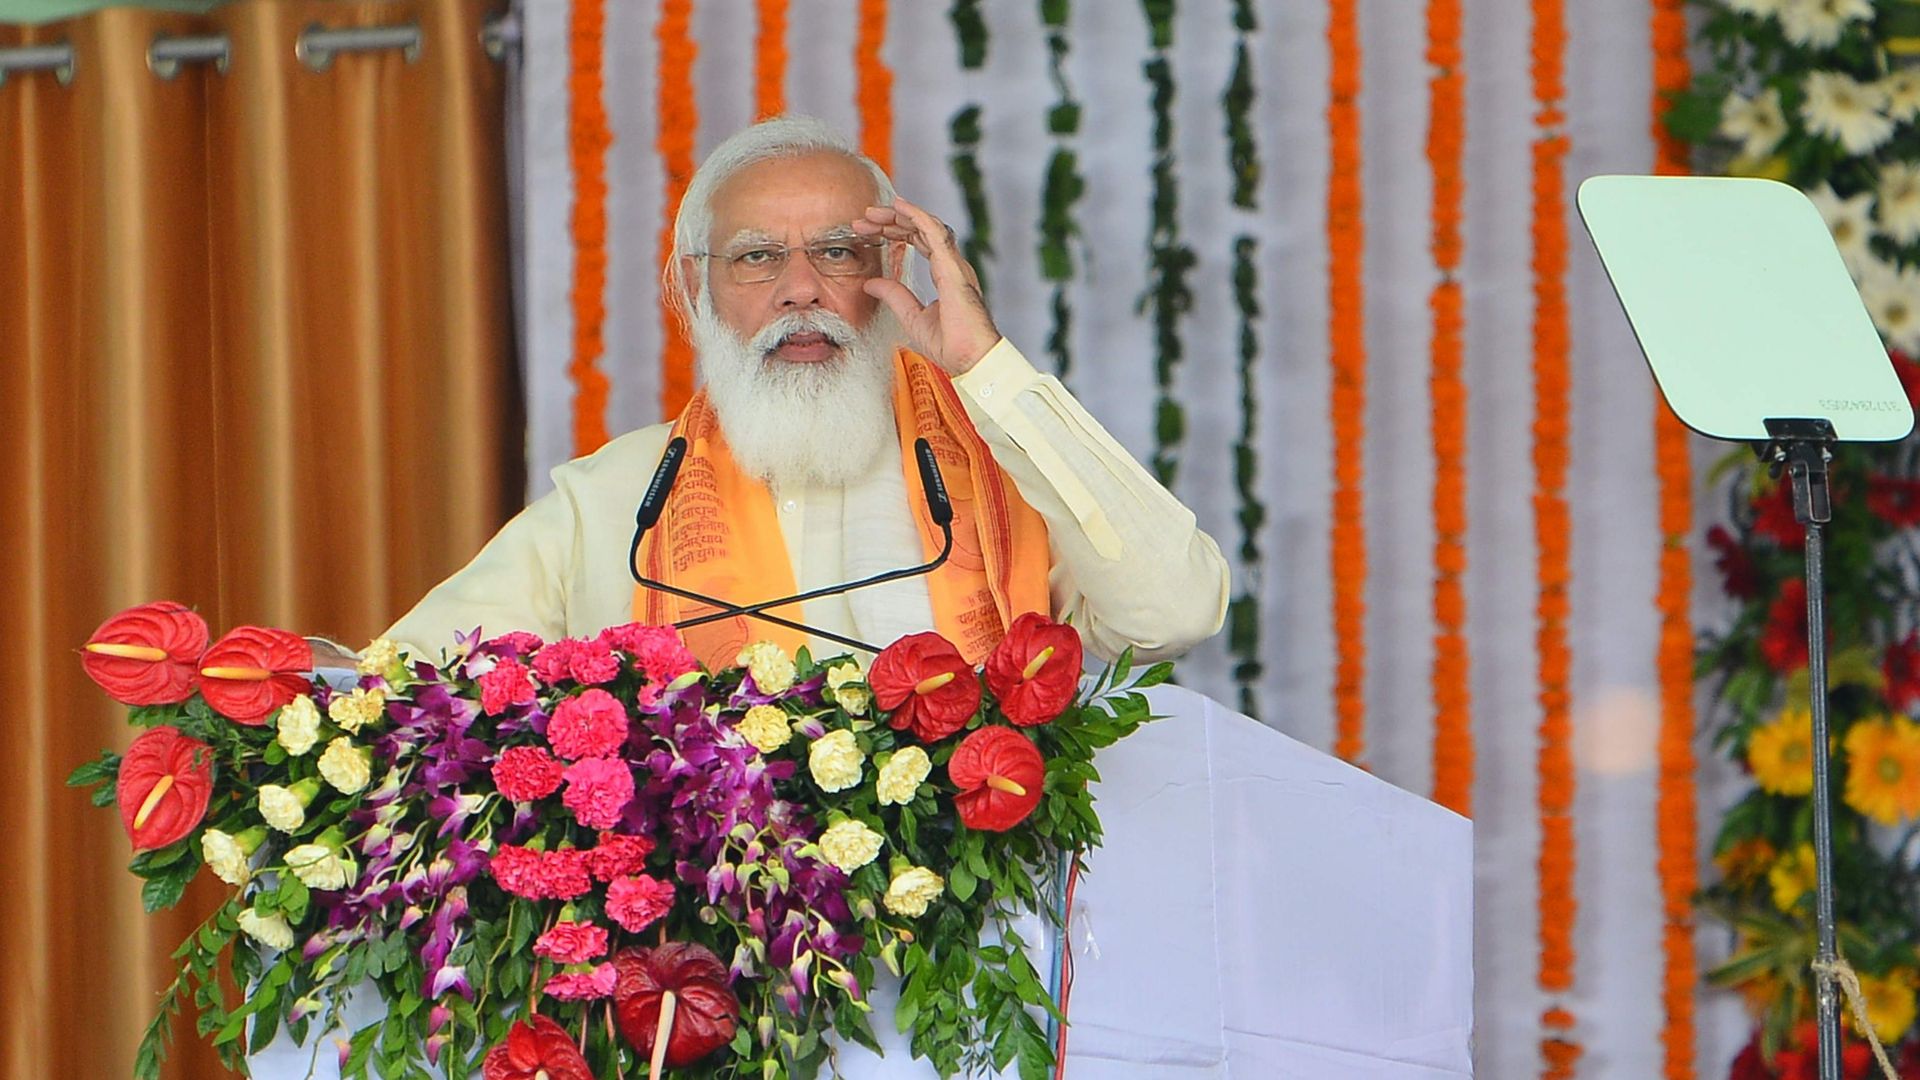  Prime minister Narendra Modi speaking during the inauguration and foundation stone laying of many projects worth Rs 1500 Crore schemes at IIT BHU ground on July 15, 2021 in Varanasi, India. 